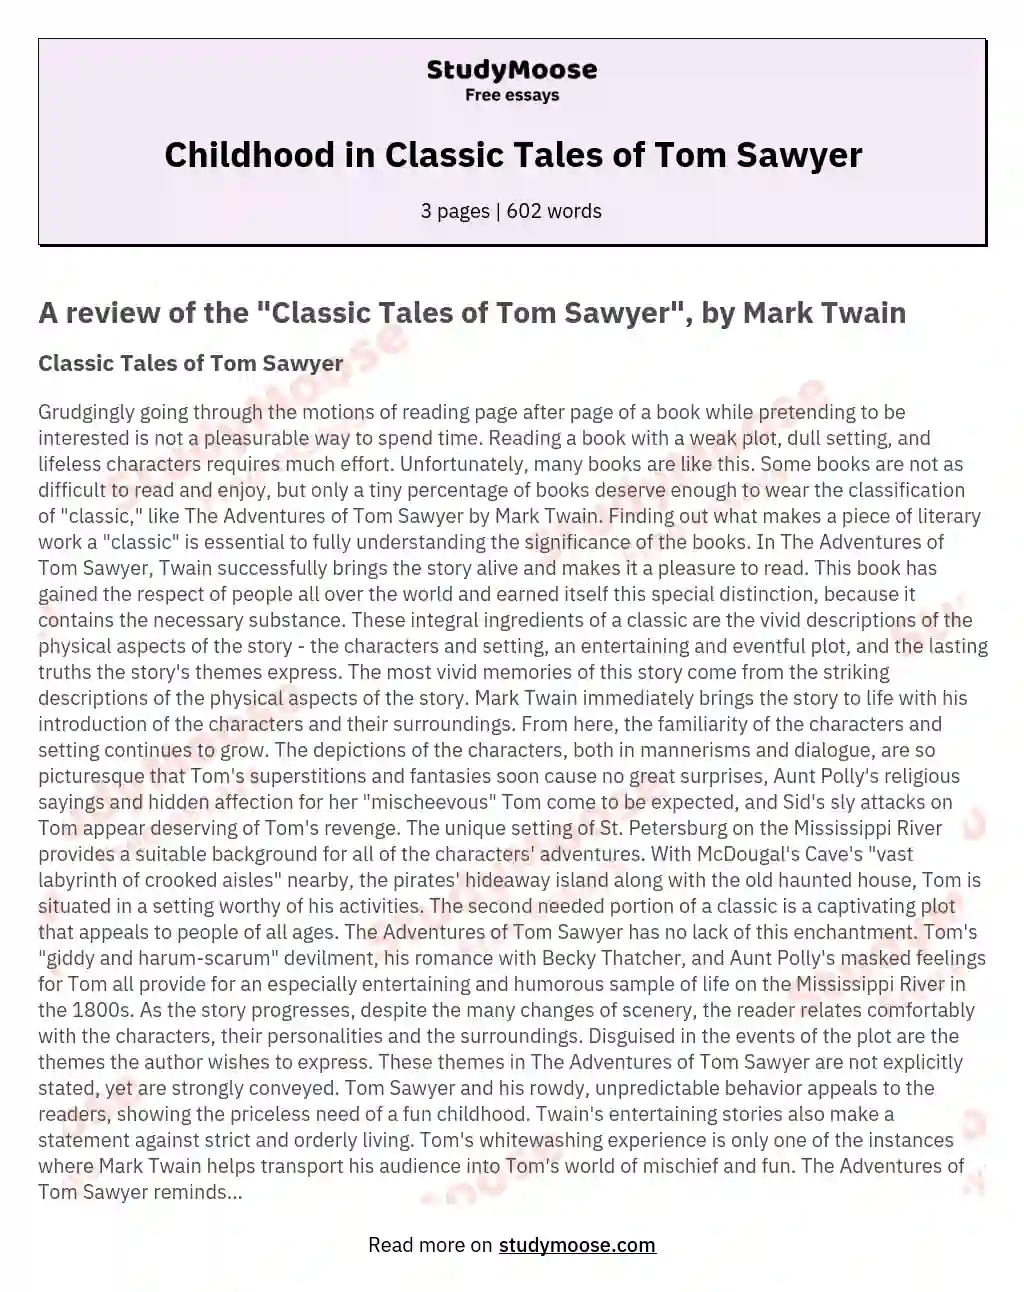 Childhood in Classic Tales of Tom Sawyer